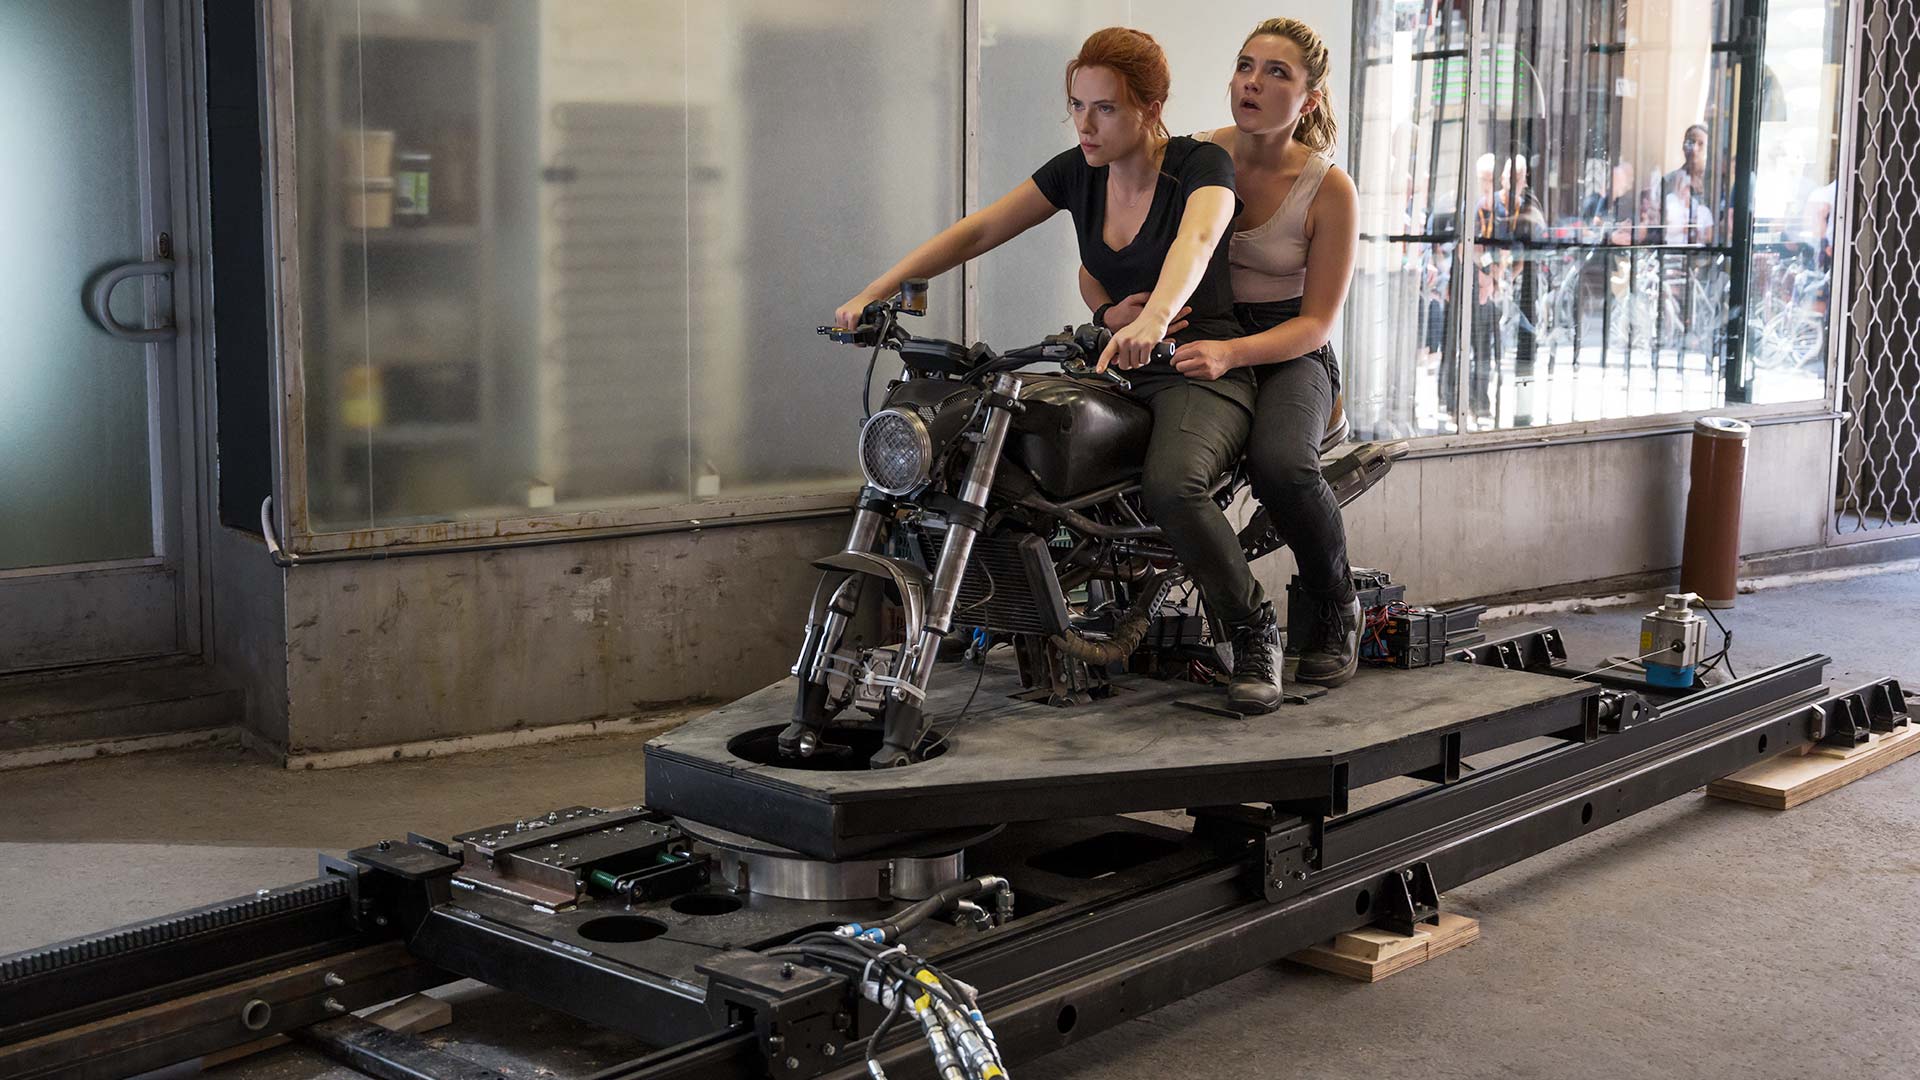 Scarlett Johansson and Florence Pugh ride a motorcycle on a track in a scene from Black Widow. - Florence Pugh